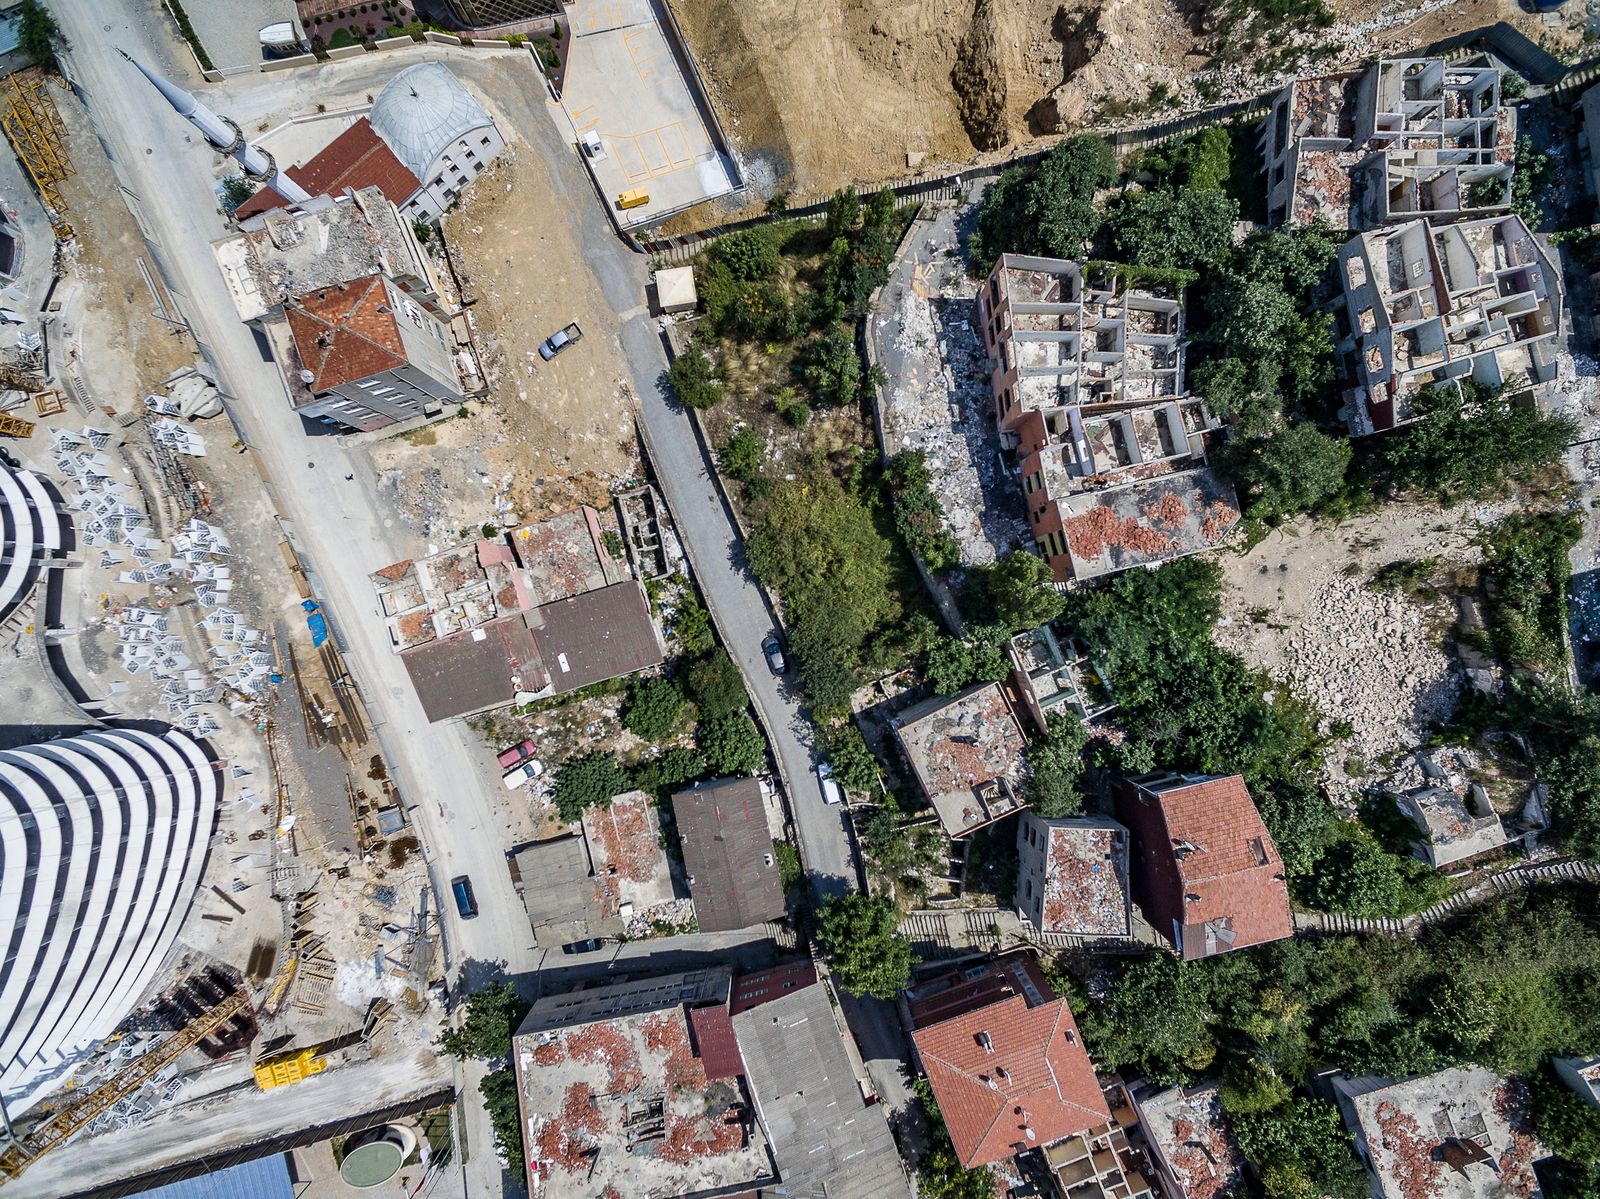 © Murat Germen - Drone photo of the old houses under demolition showing the empty rooms without the roofs.